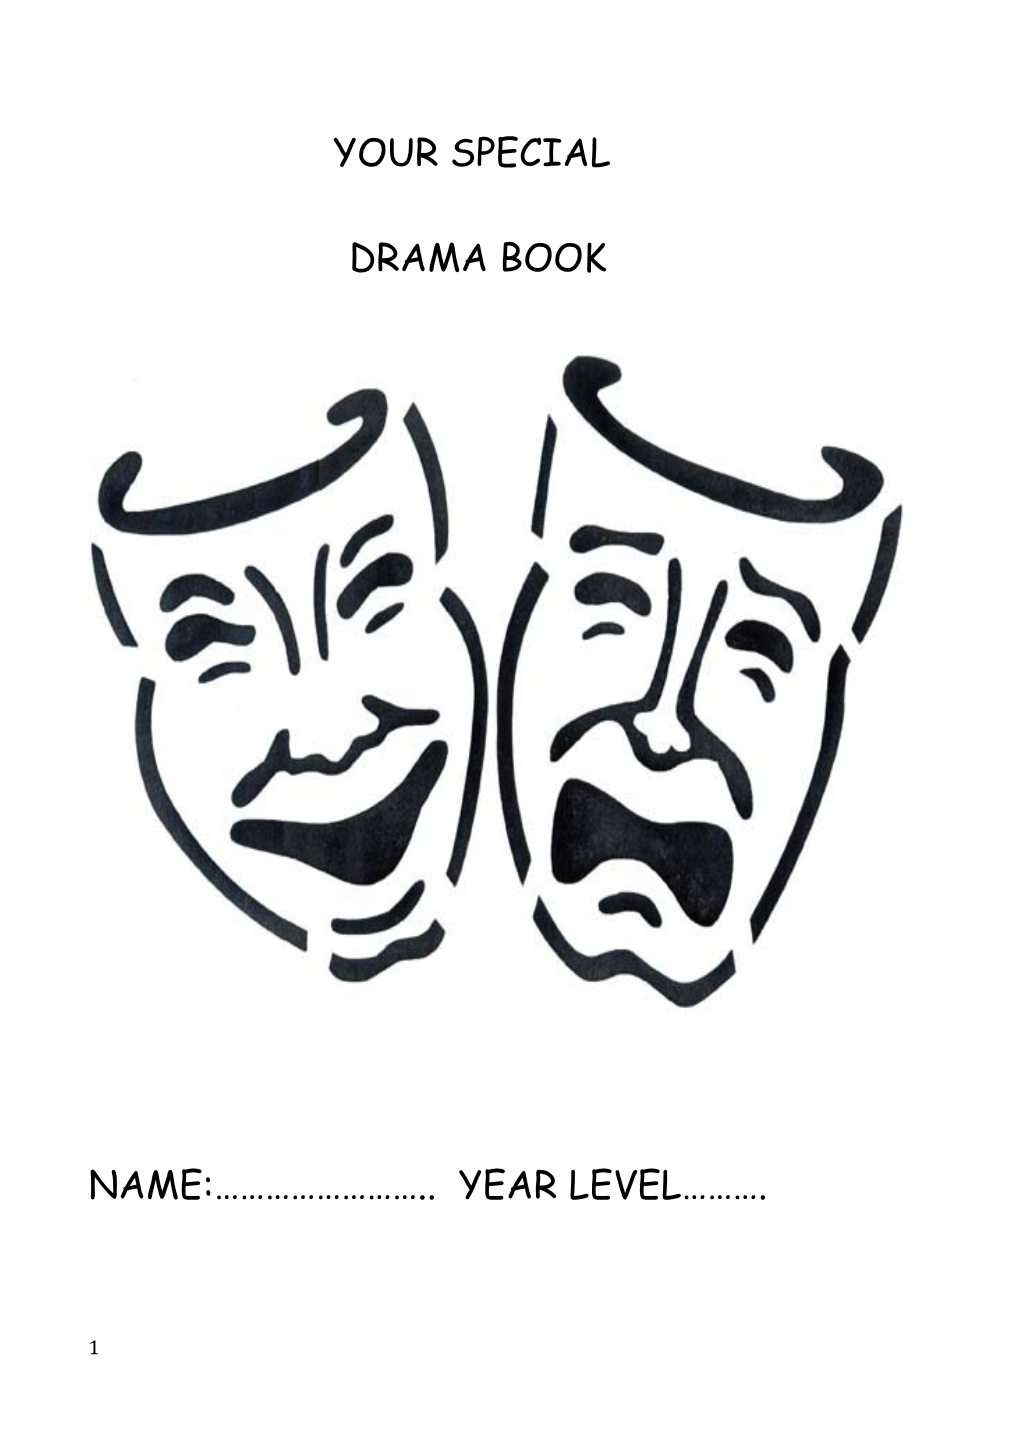 In Drama, You Will Learn About